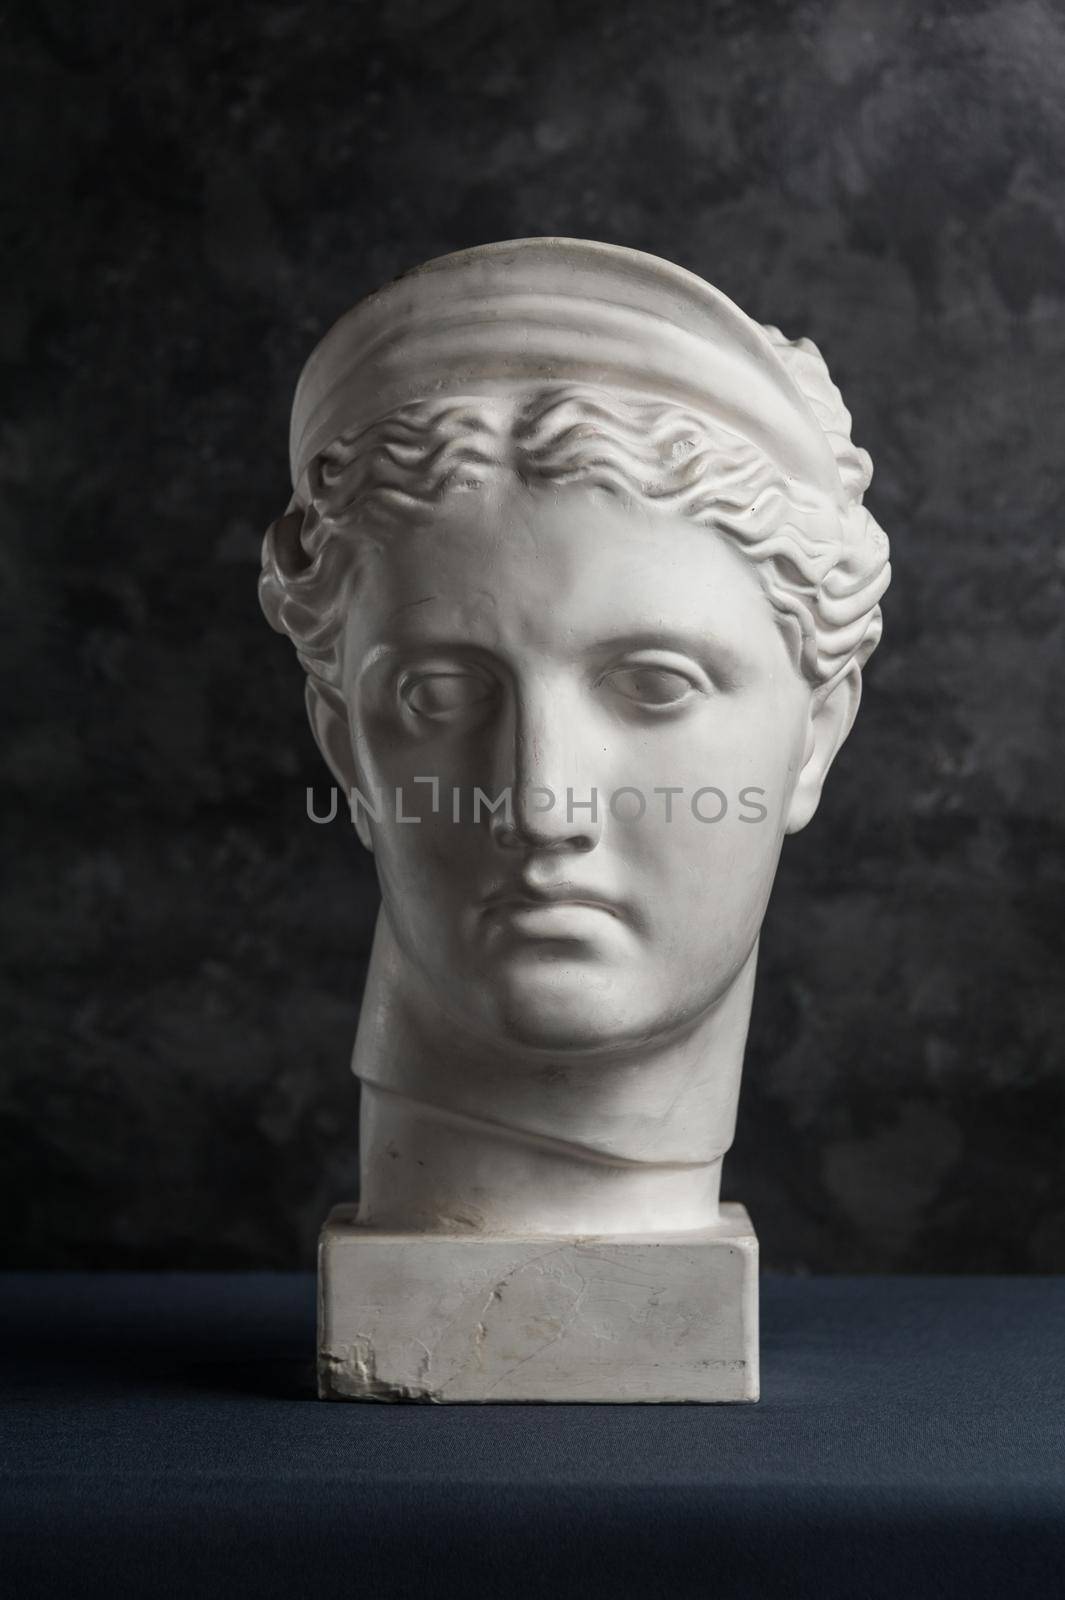 White gypsum copy of ancient statue of Diana head for artists on a dark textured background. Plaster sculpture of woman face. Diana in Roman mythology the goddess of nature and hunting.